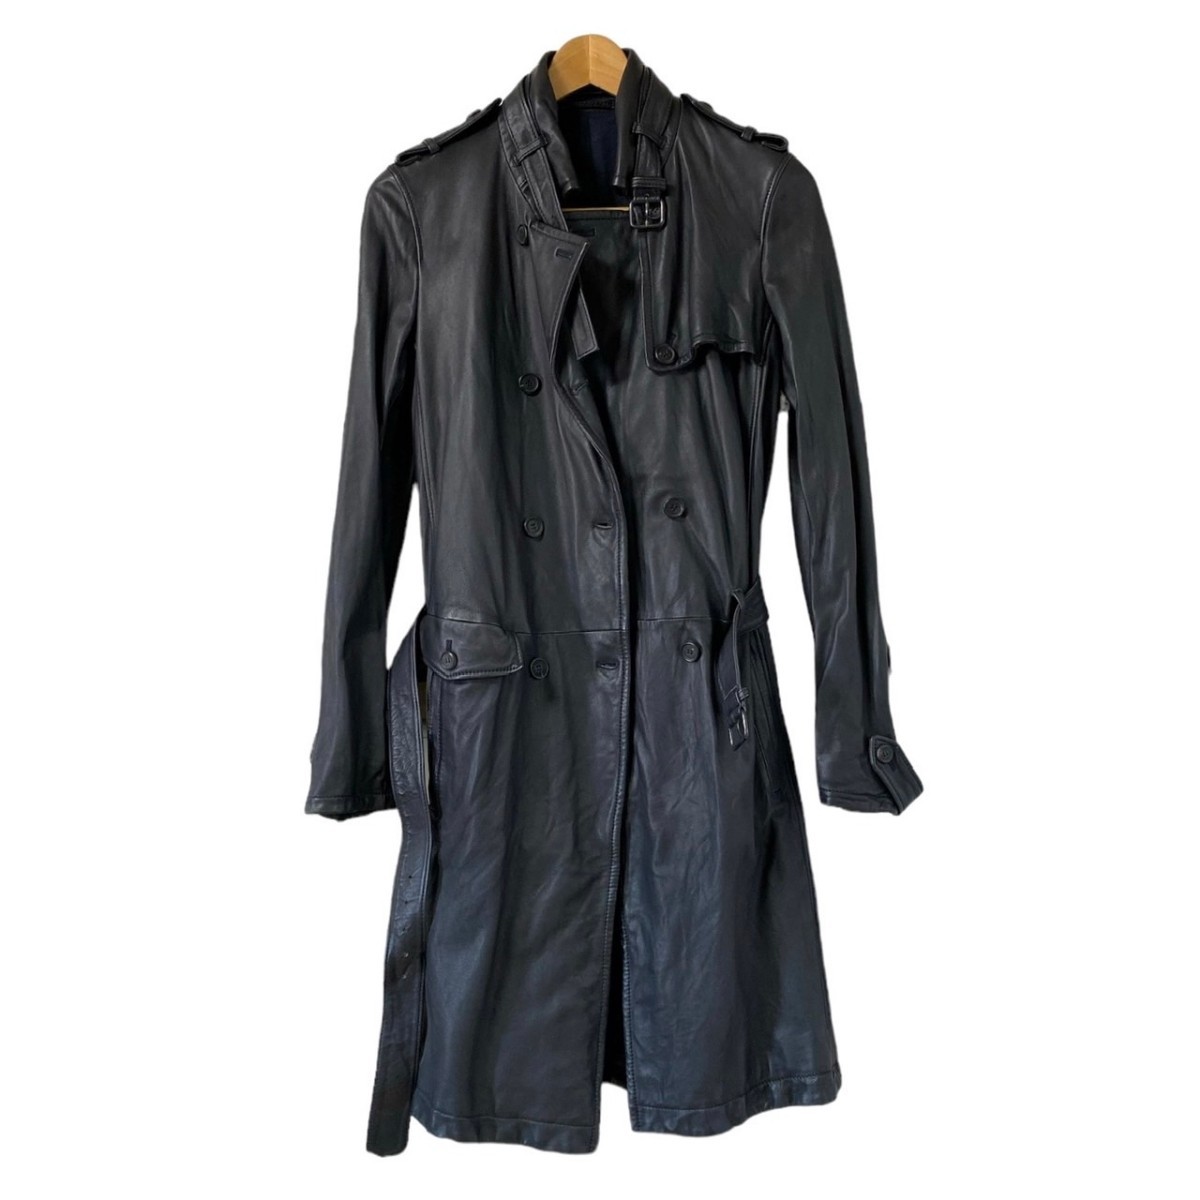  almost unused Neil Barrett leather trench coat coat sheep leather S size Italy made black 23L08